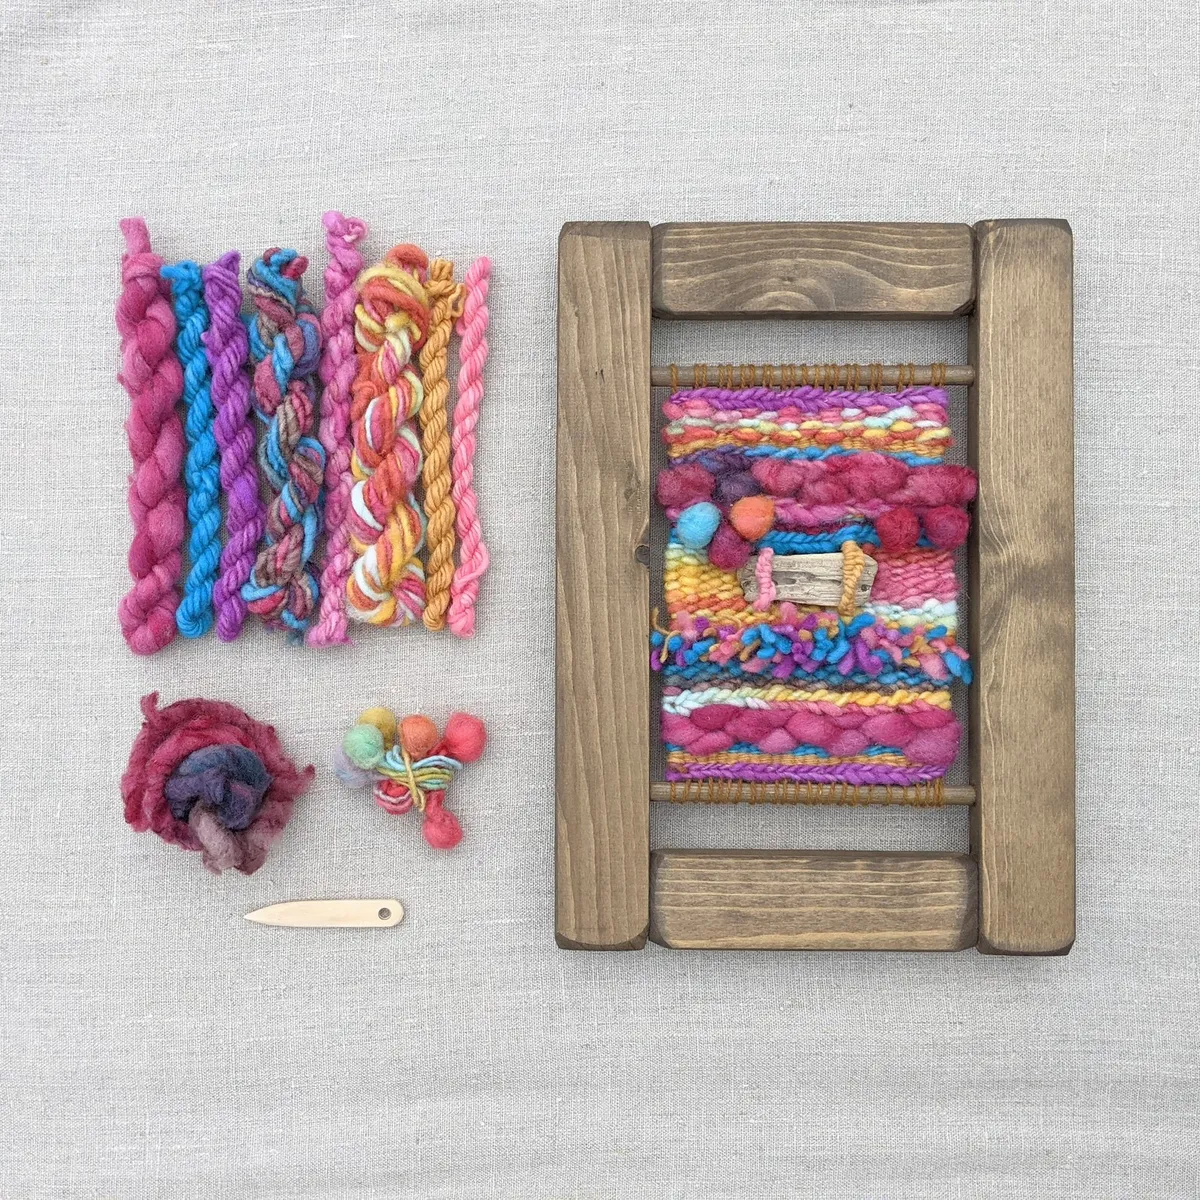 Weaving craft kit for adults